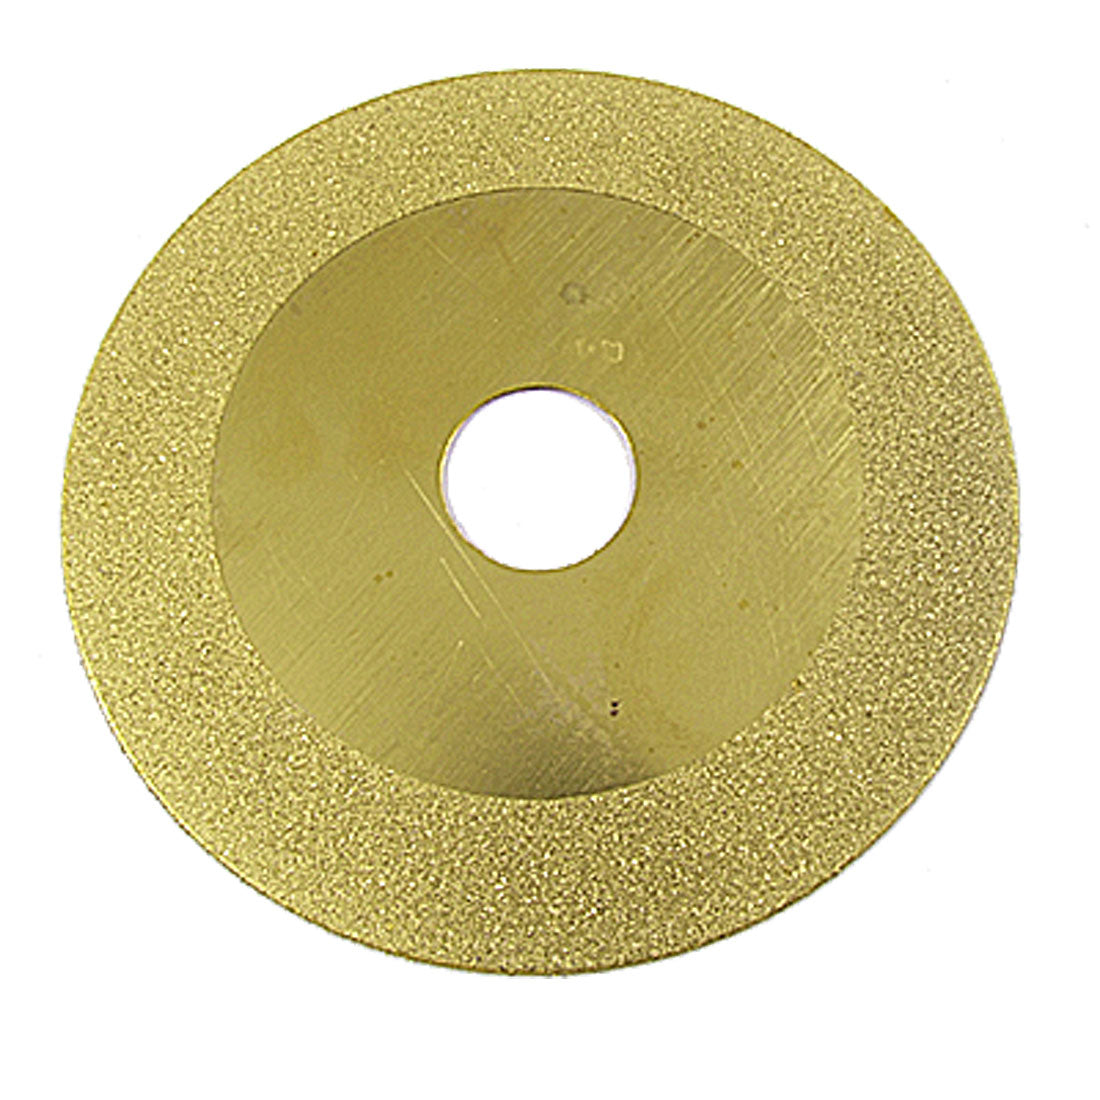 uxcell Uxcell 4" Diamond Coated Glass Grinding Grind Disc Wheel Gold Tone